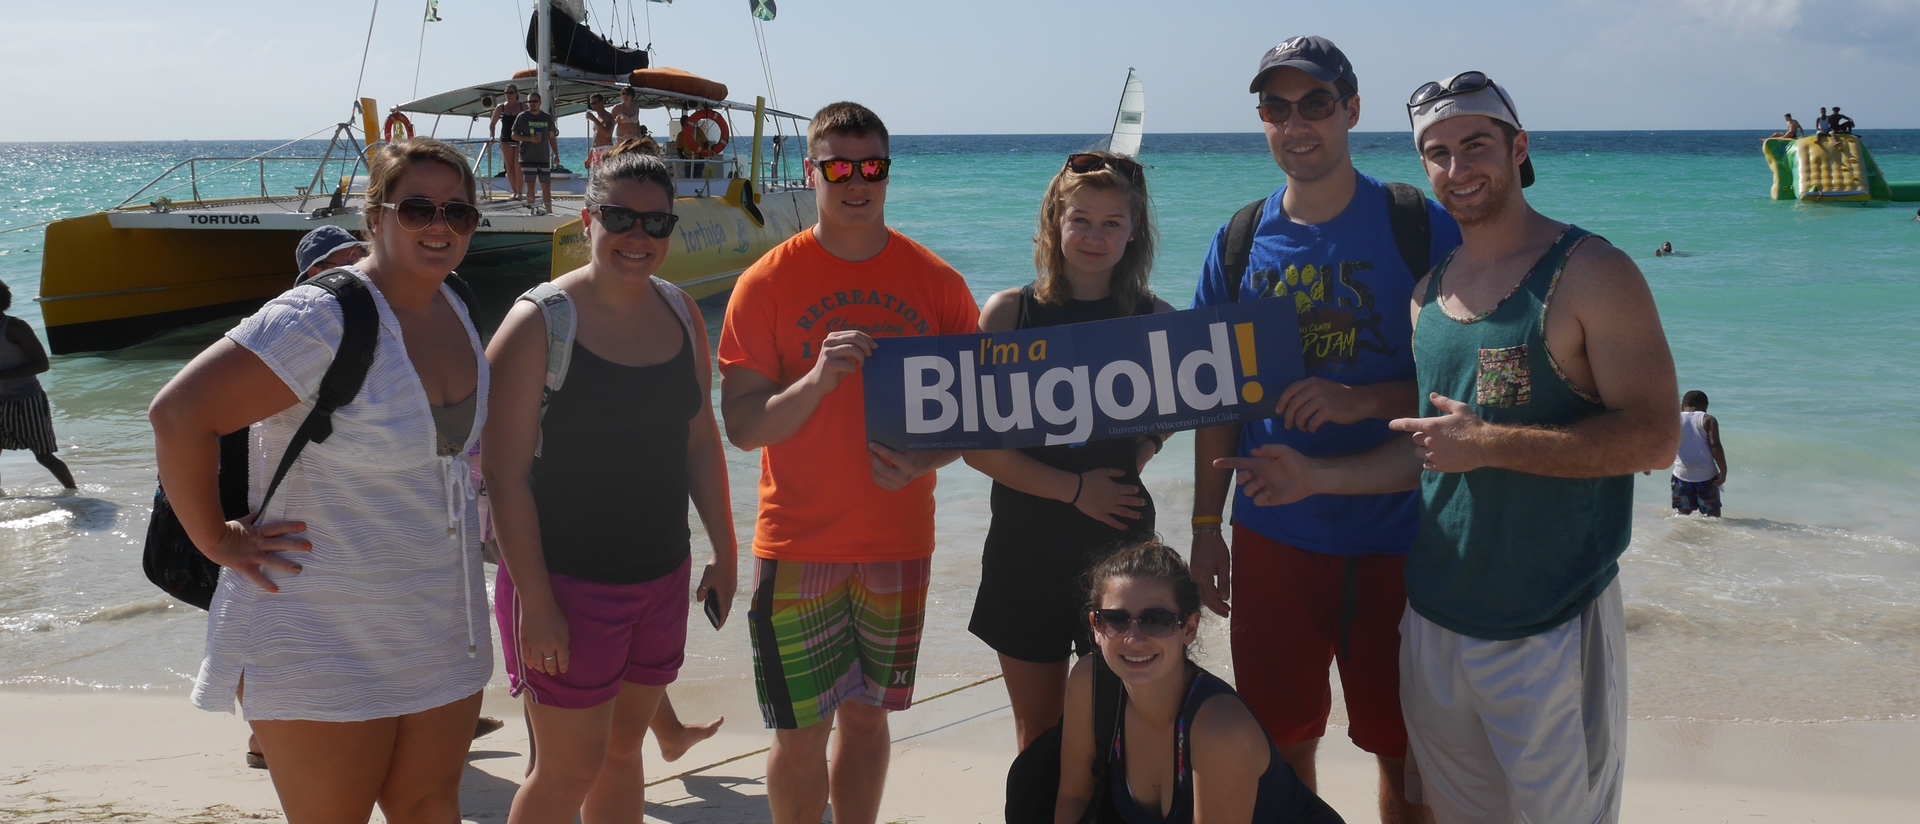 English students on immerison trip to Jamaica